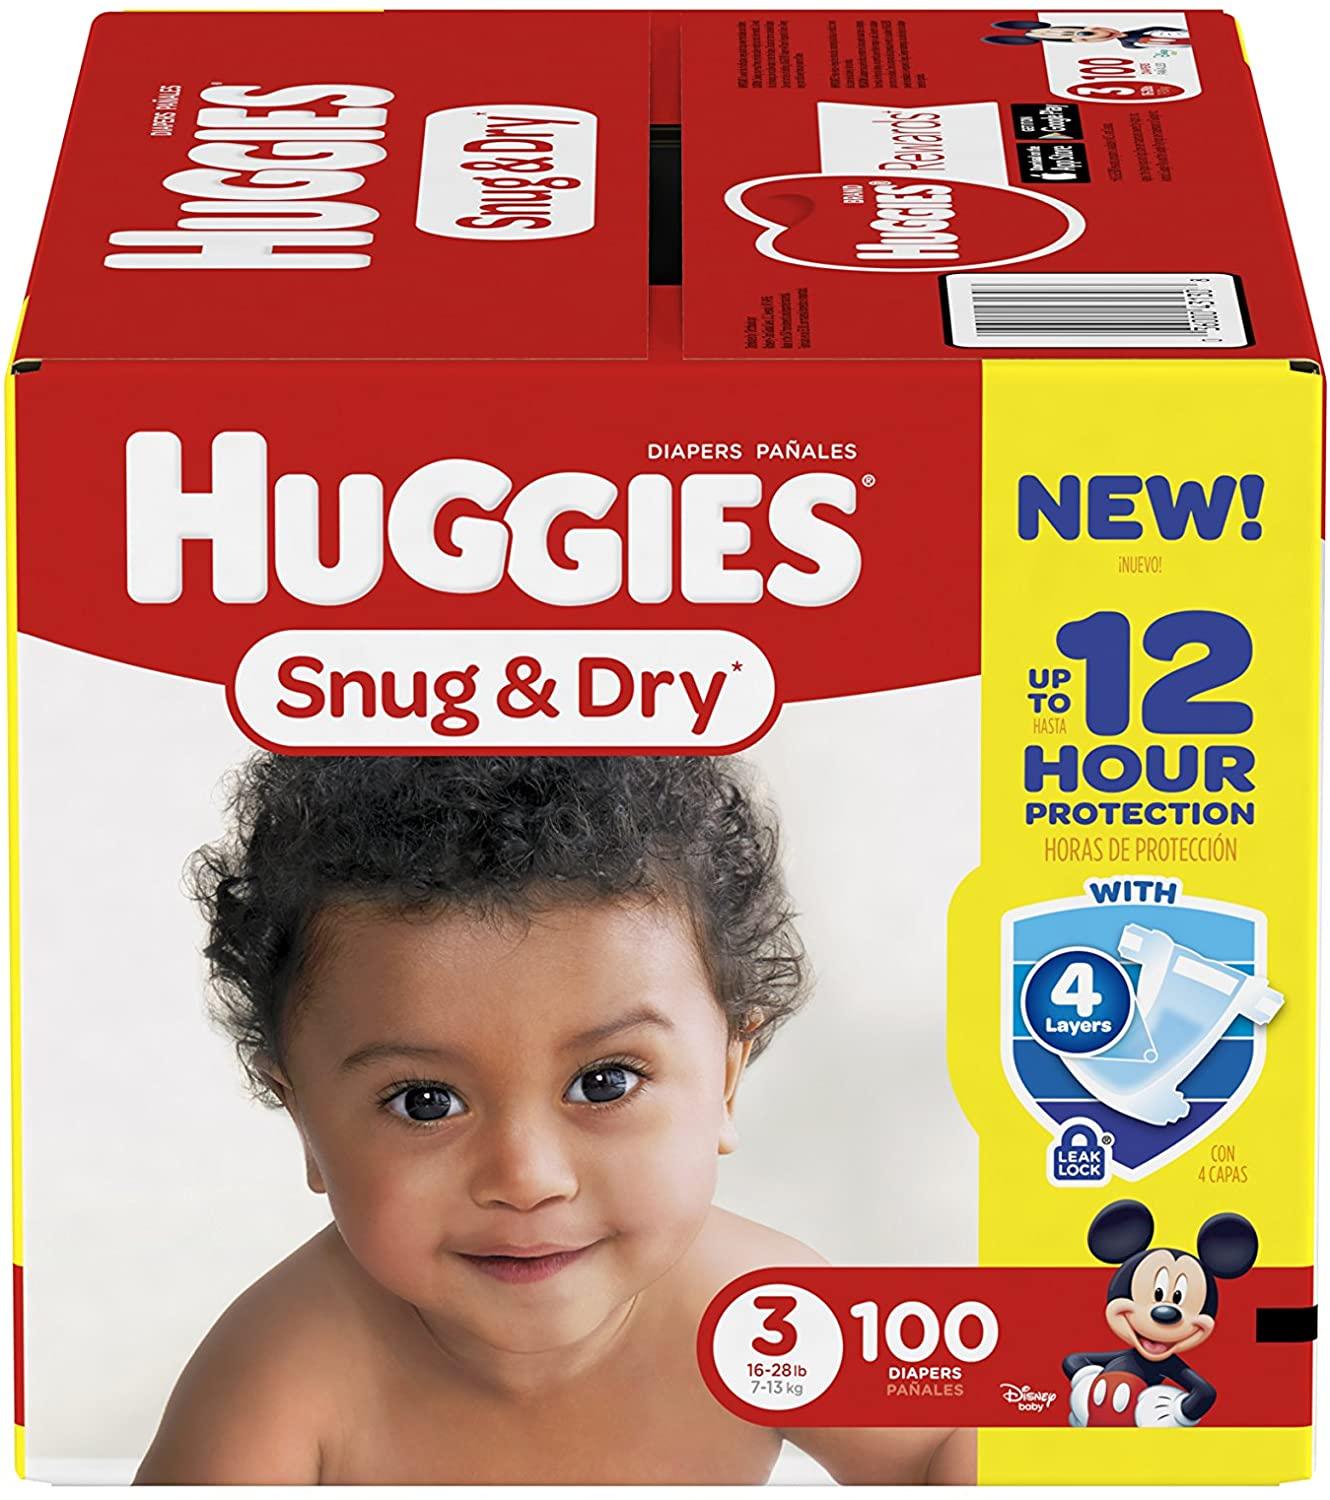 Huggies Snug & Dry Diapers, Size 3, 100 Count